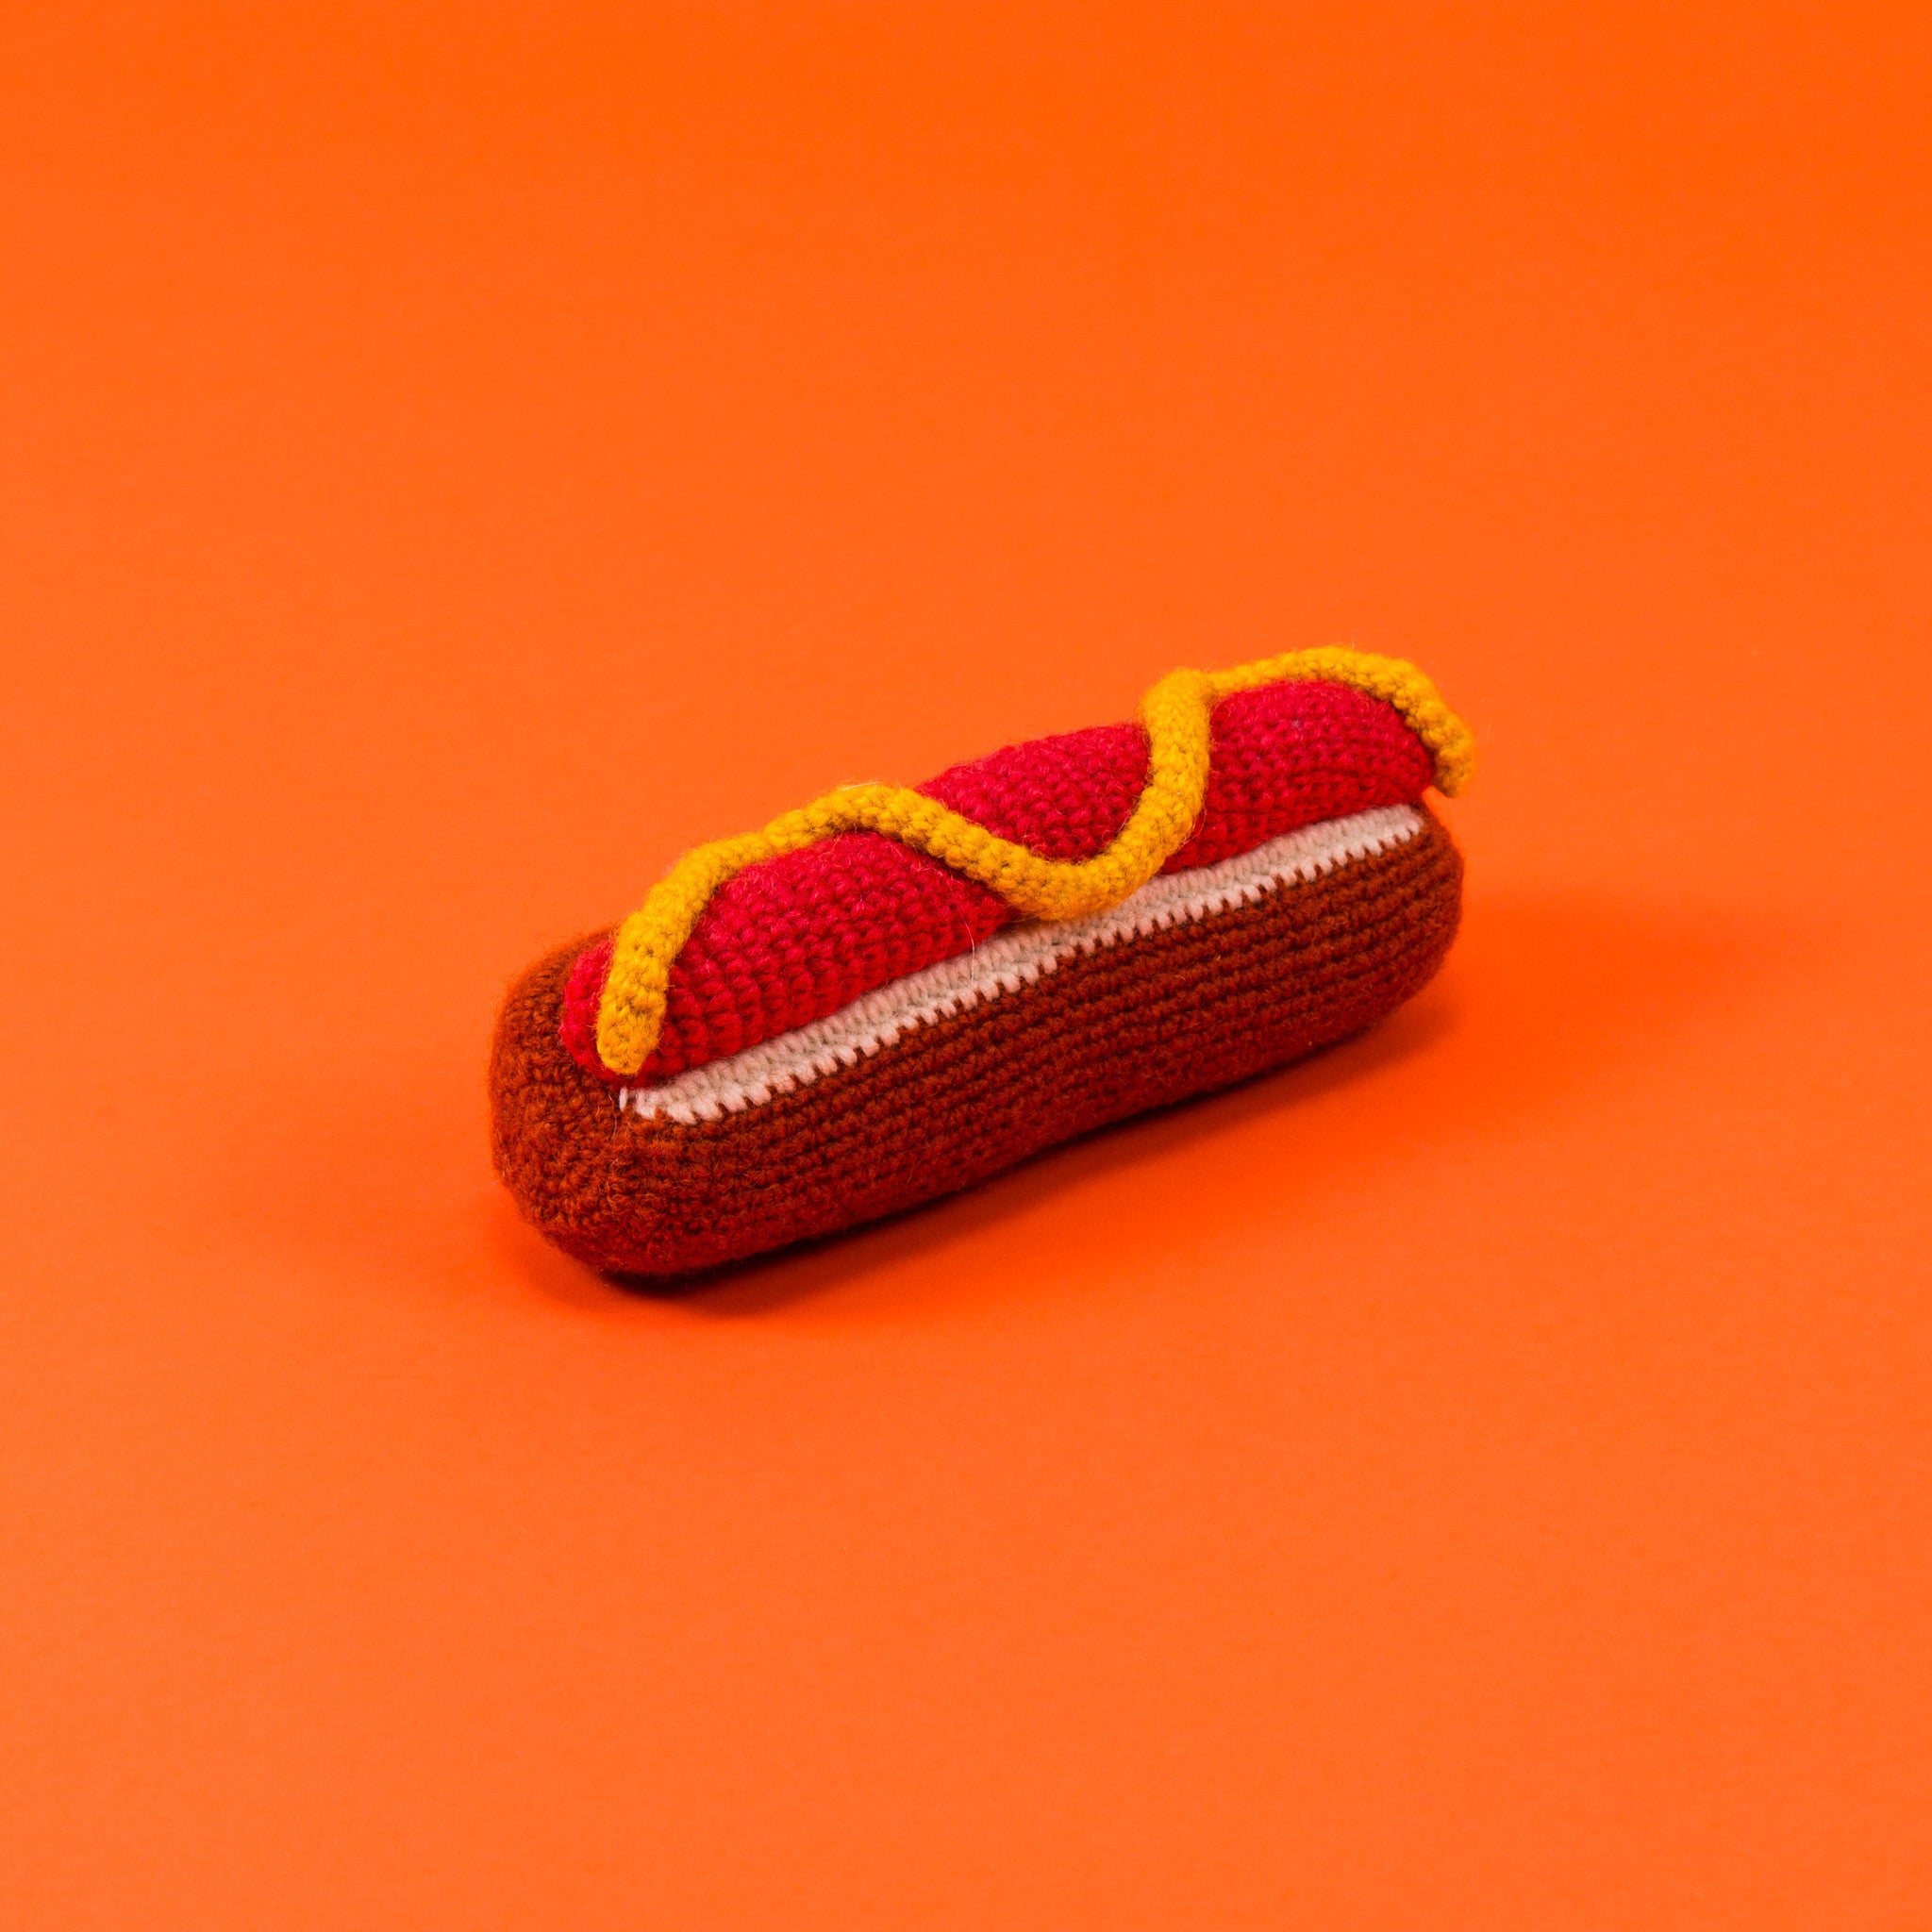 Dog Toy: Hand Knitted Hot Dog